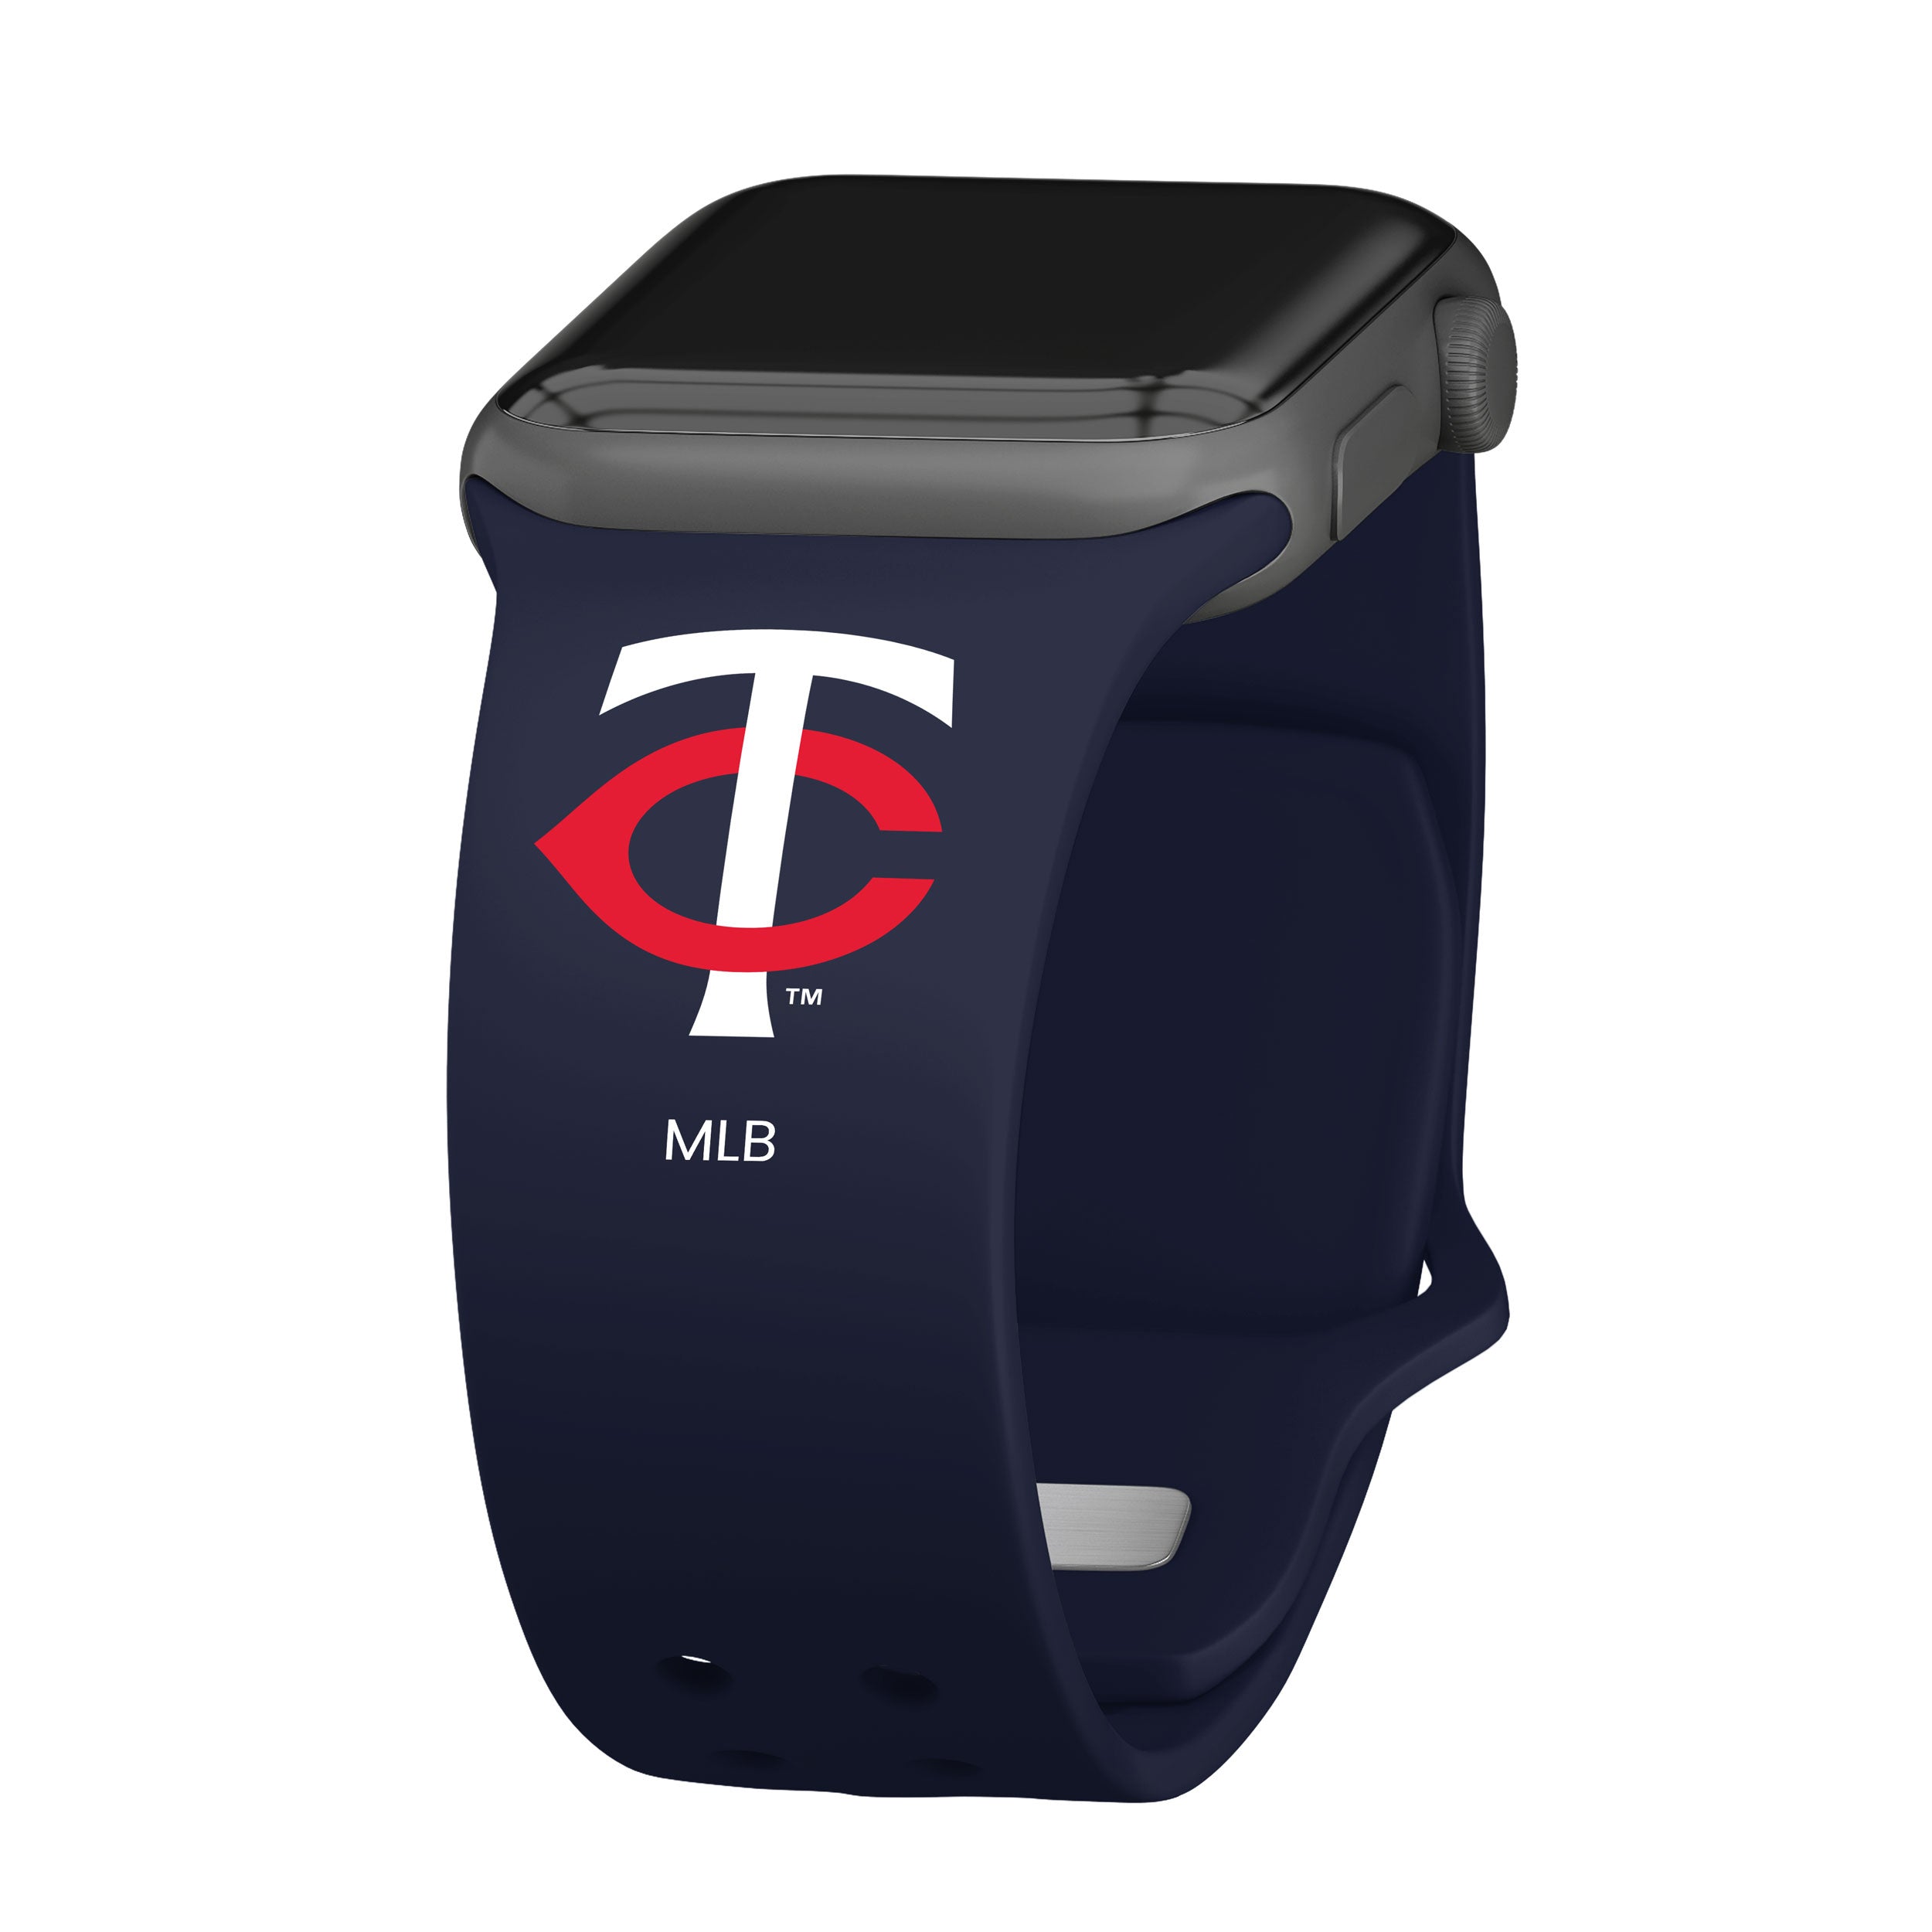 MLB - Cleveland Guardians Apple Watch Band | Officially Licensed | MobyFox